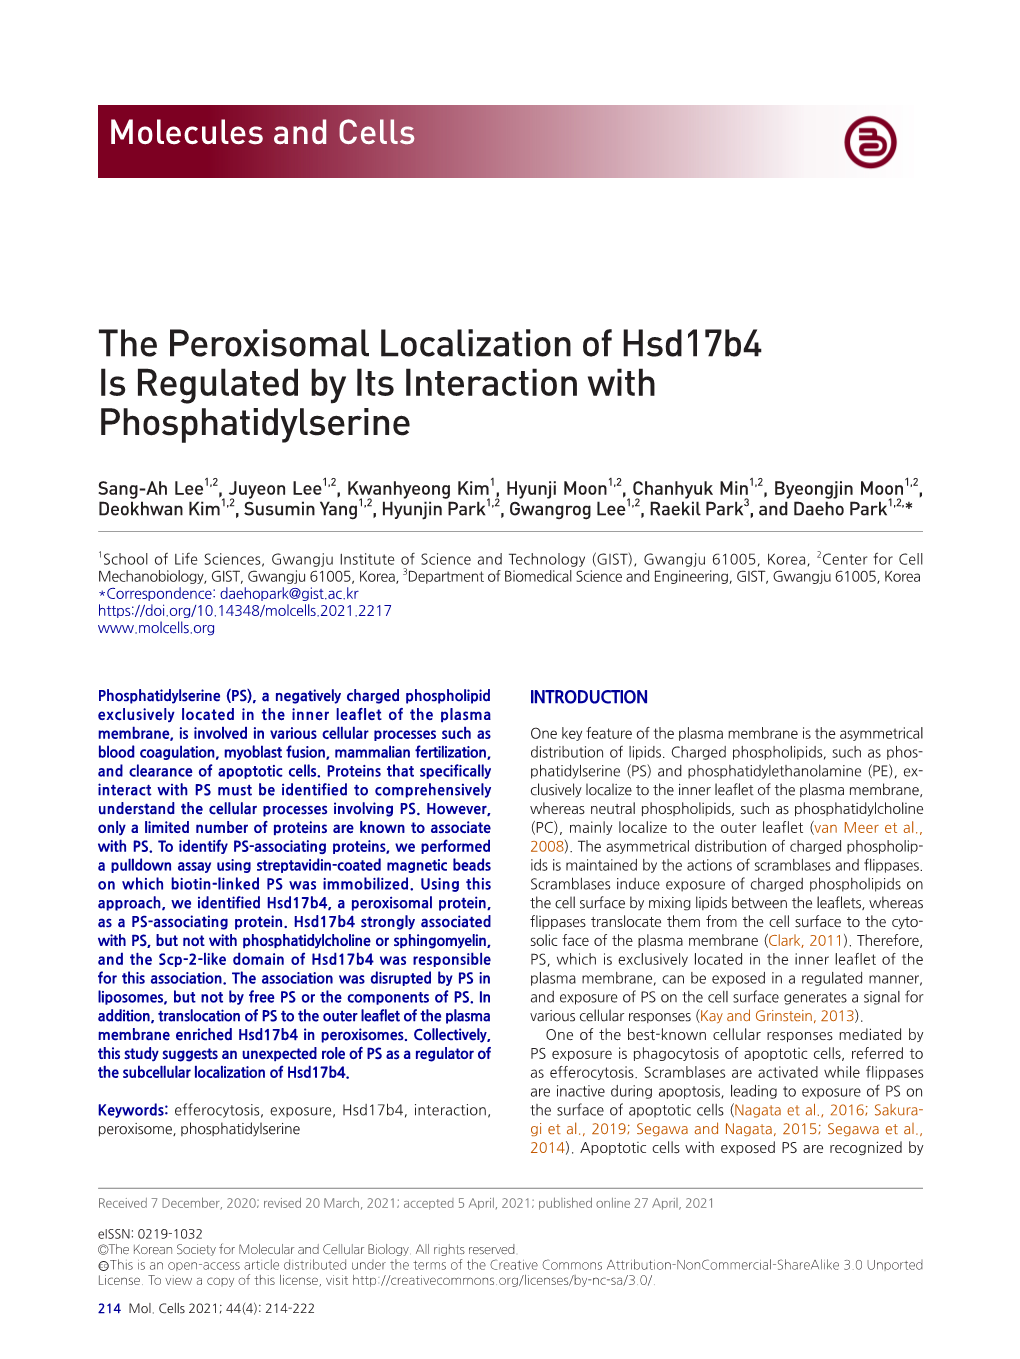 The Peroxisomal Localization of Hsd17b4 Is Regulated by Its Interaction with Phosphatidylserine